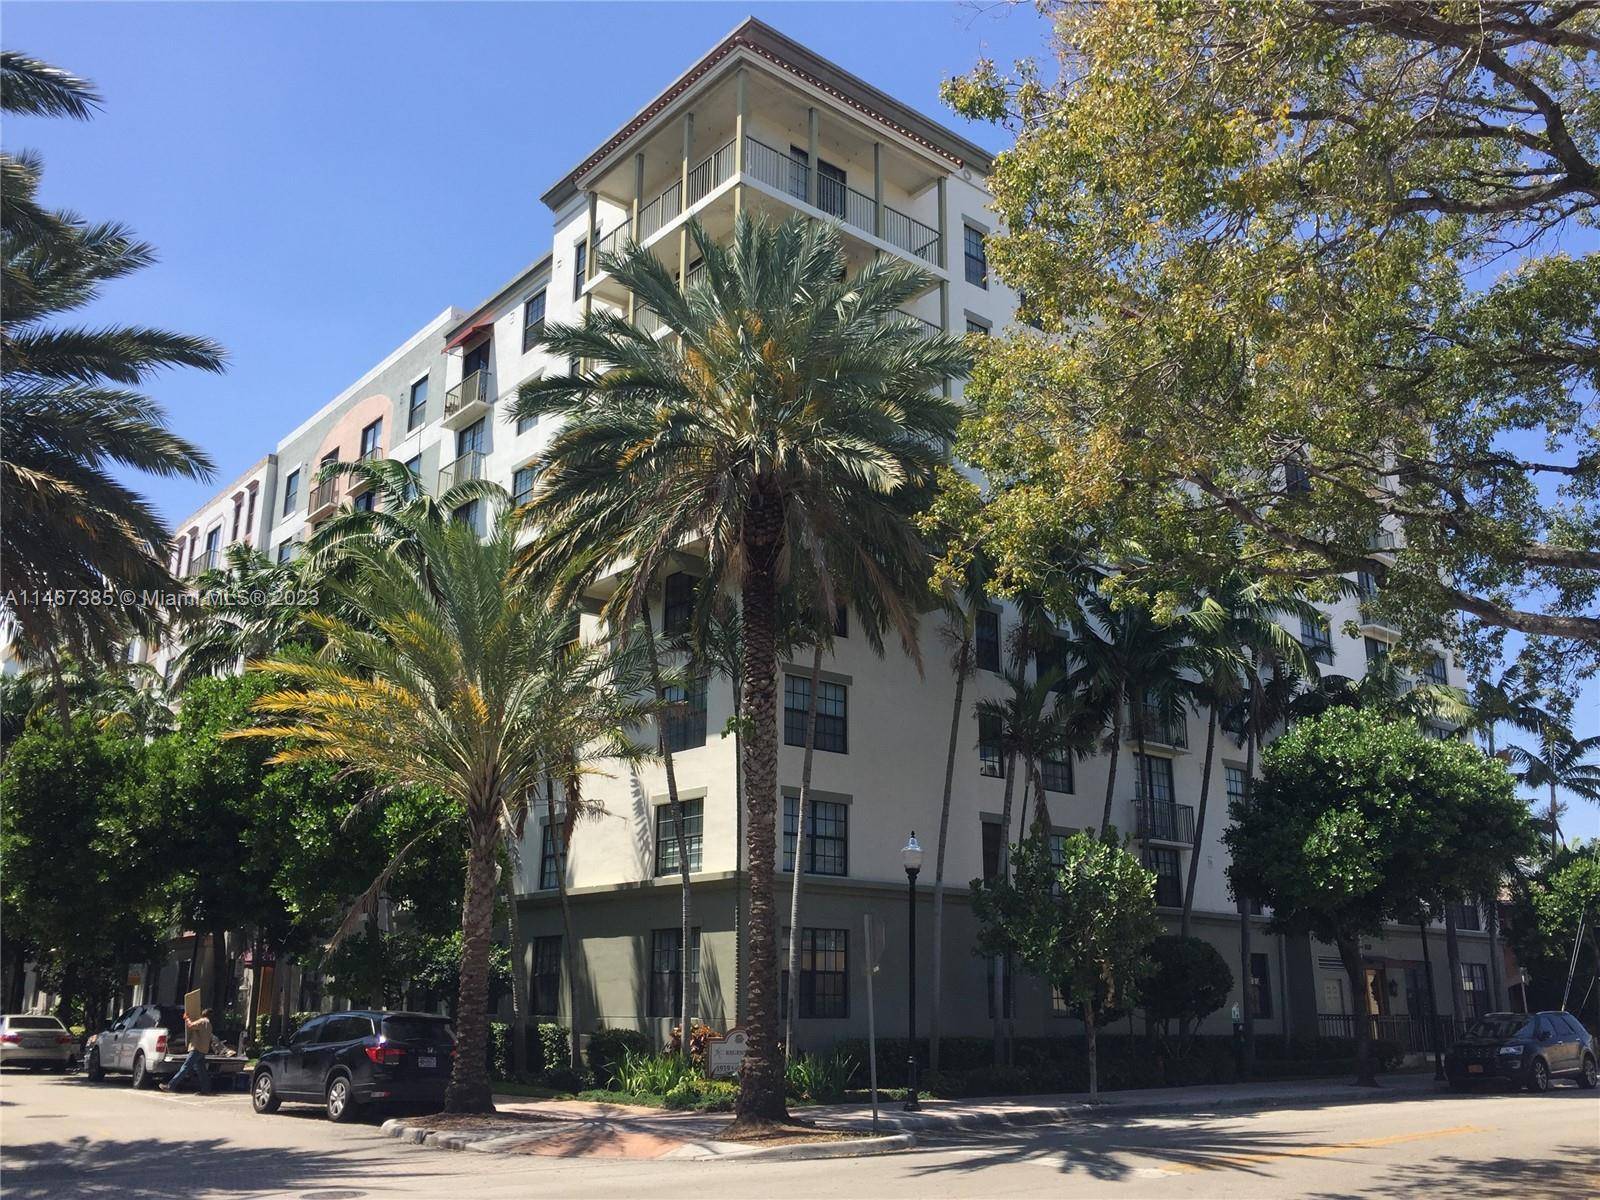 SPACIOUS REMODELED 2BED 2BATH LOWER PENTHOUSE UNIT.